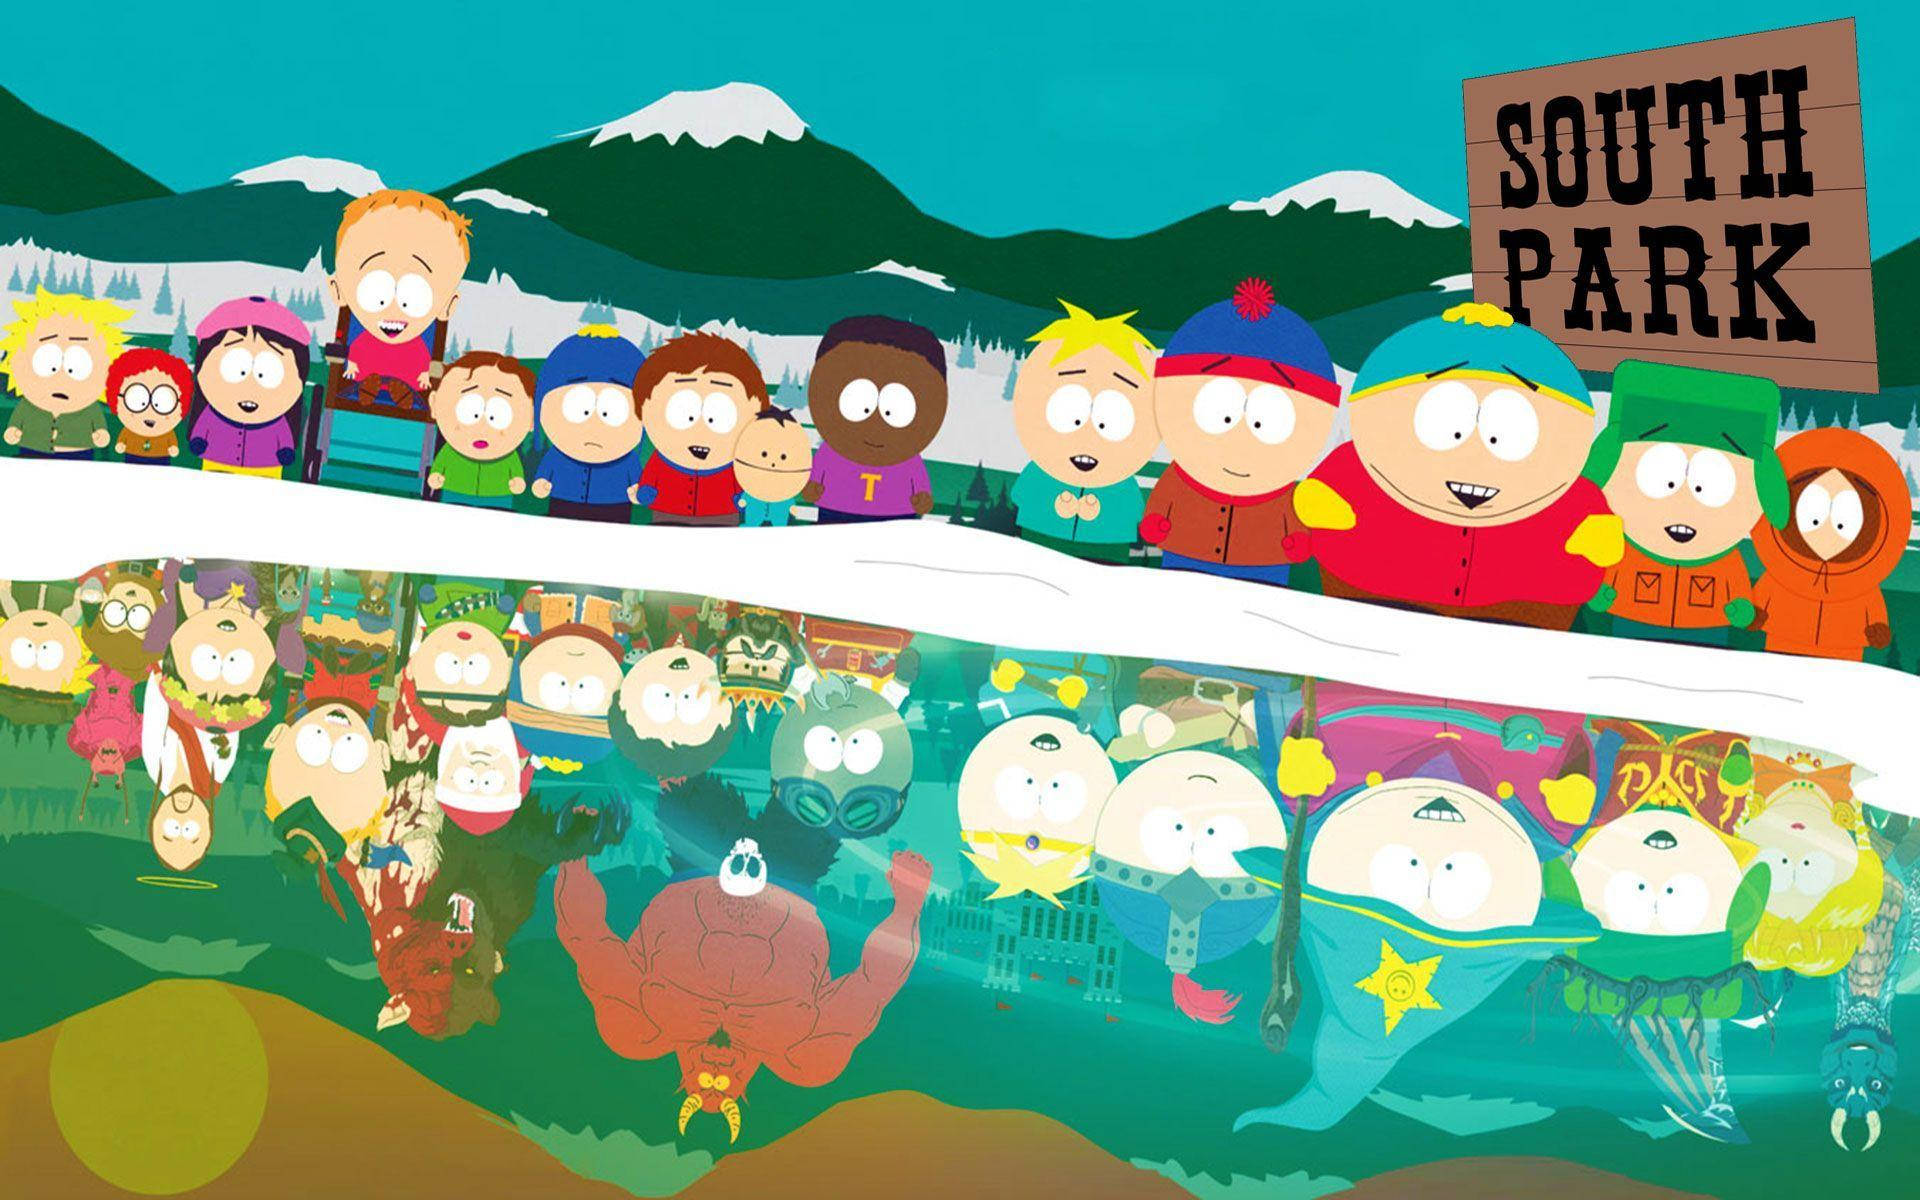 South Park Cast In Lake Art Background